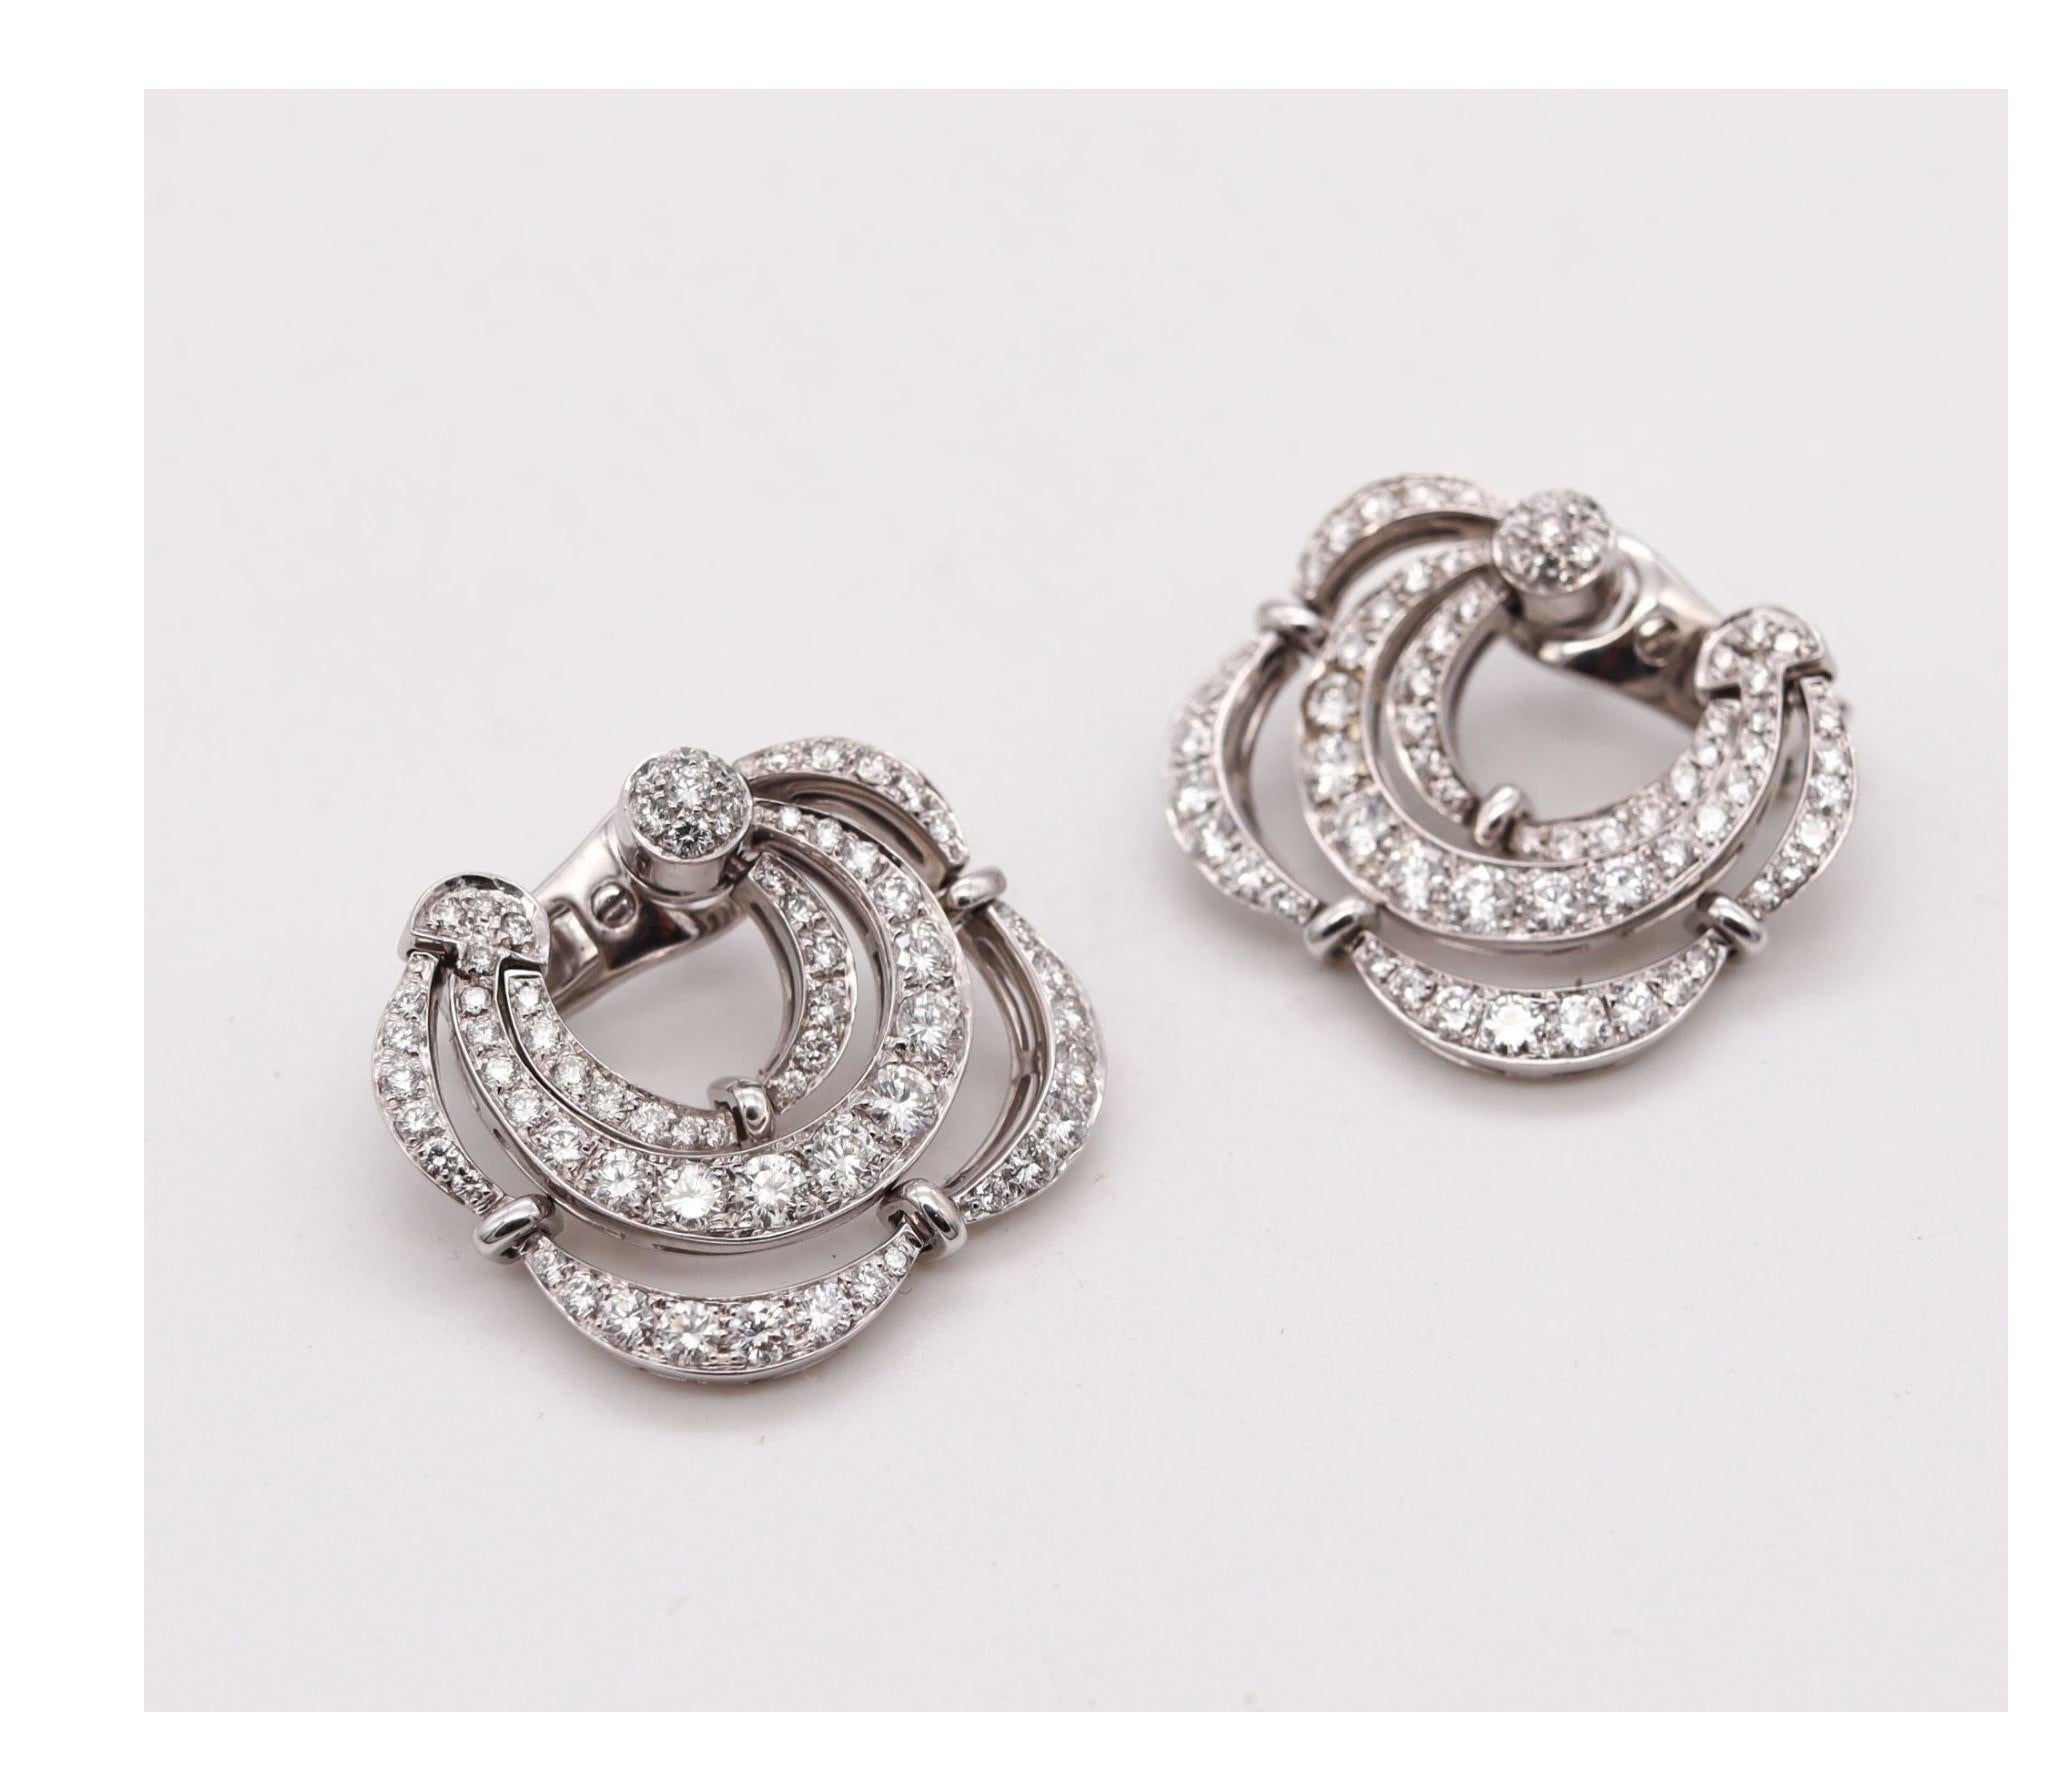 Brilliant Cut Bvlgari Roma Clips Earrings in 18 Kt White Gold with 5.76 Cts in VS Diamonds